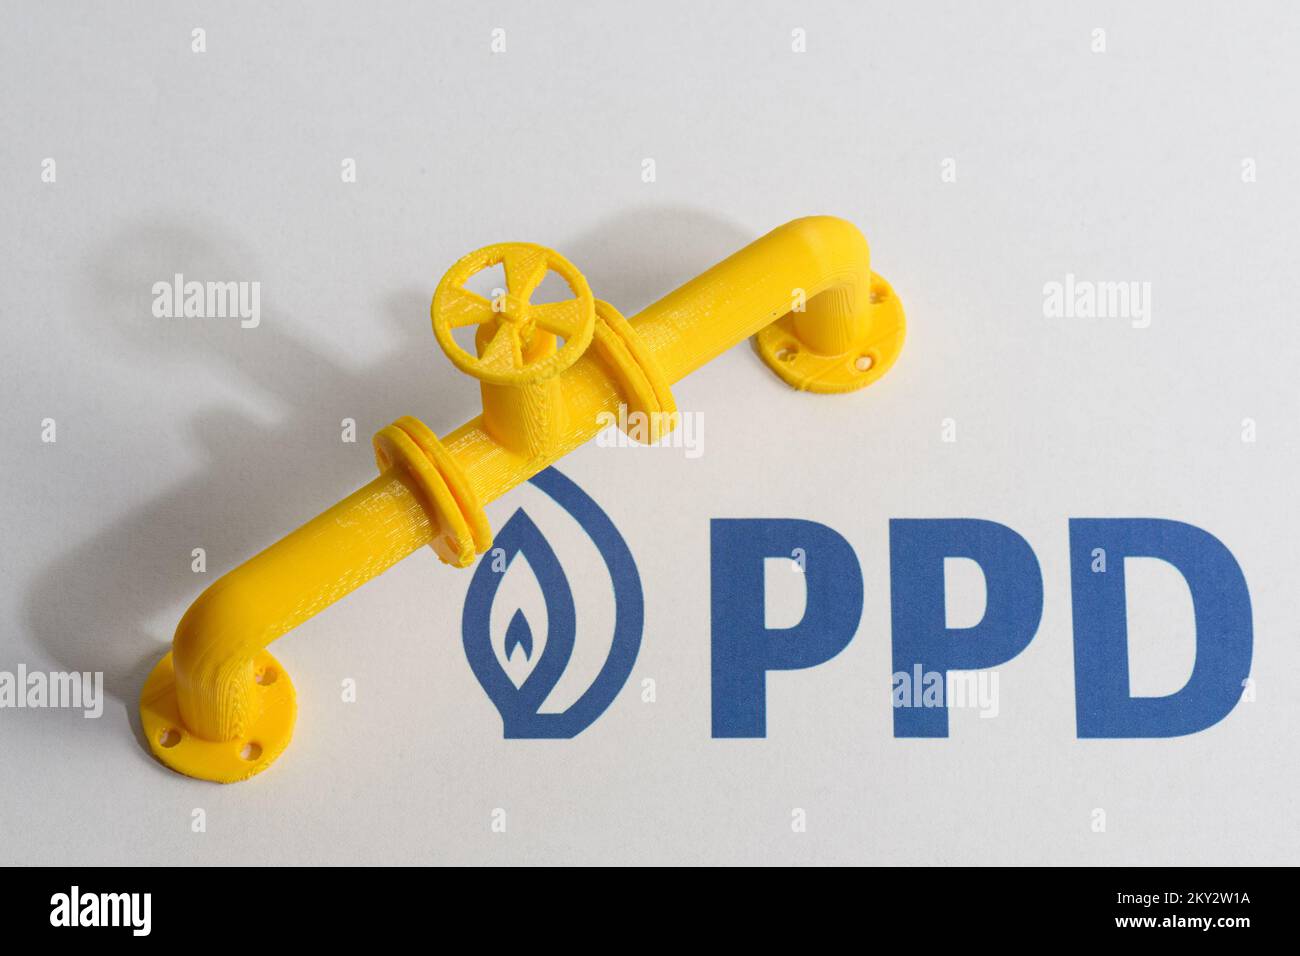 Illustration for the Prvo plinarsko drustvo (Croatian First Gas Company  (PPD)), which is one of the most significant entities on the gas market and  the largest importer of natural gas in the